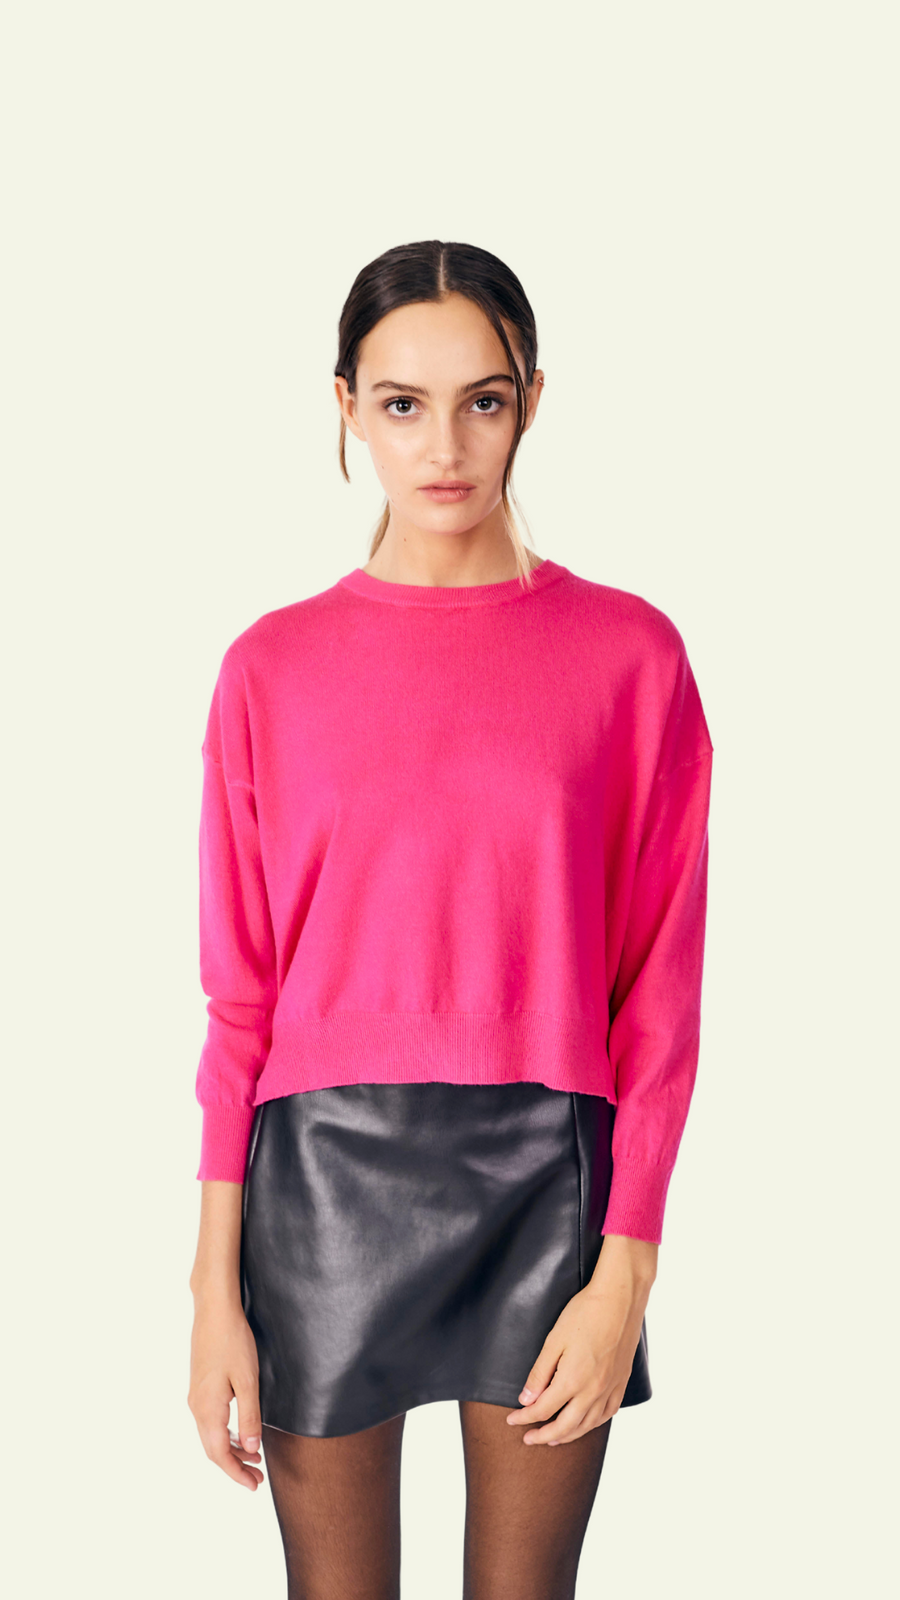 Hot Pink Sweater